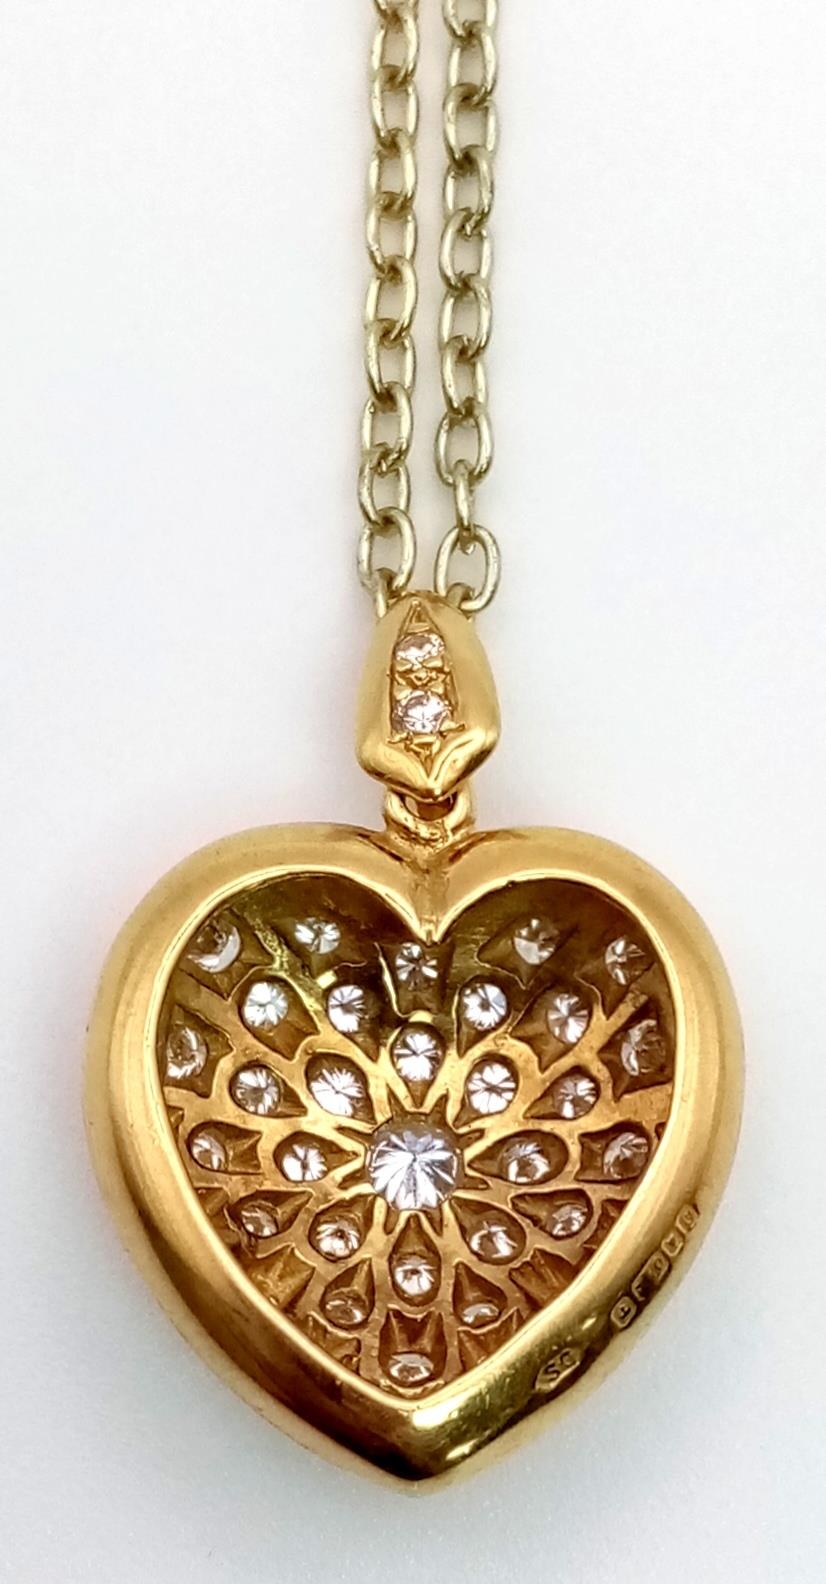 An 18K Yellow Gold Heart-Shaped Diamond Pendant. With over 1ct of bright white diamonds this - Image 3 of 4